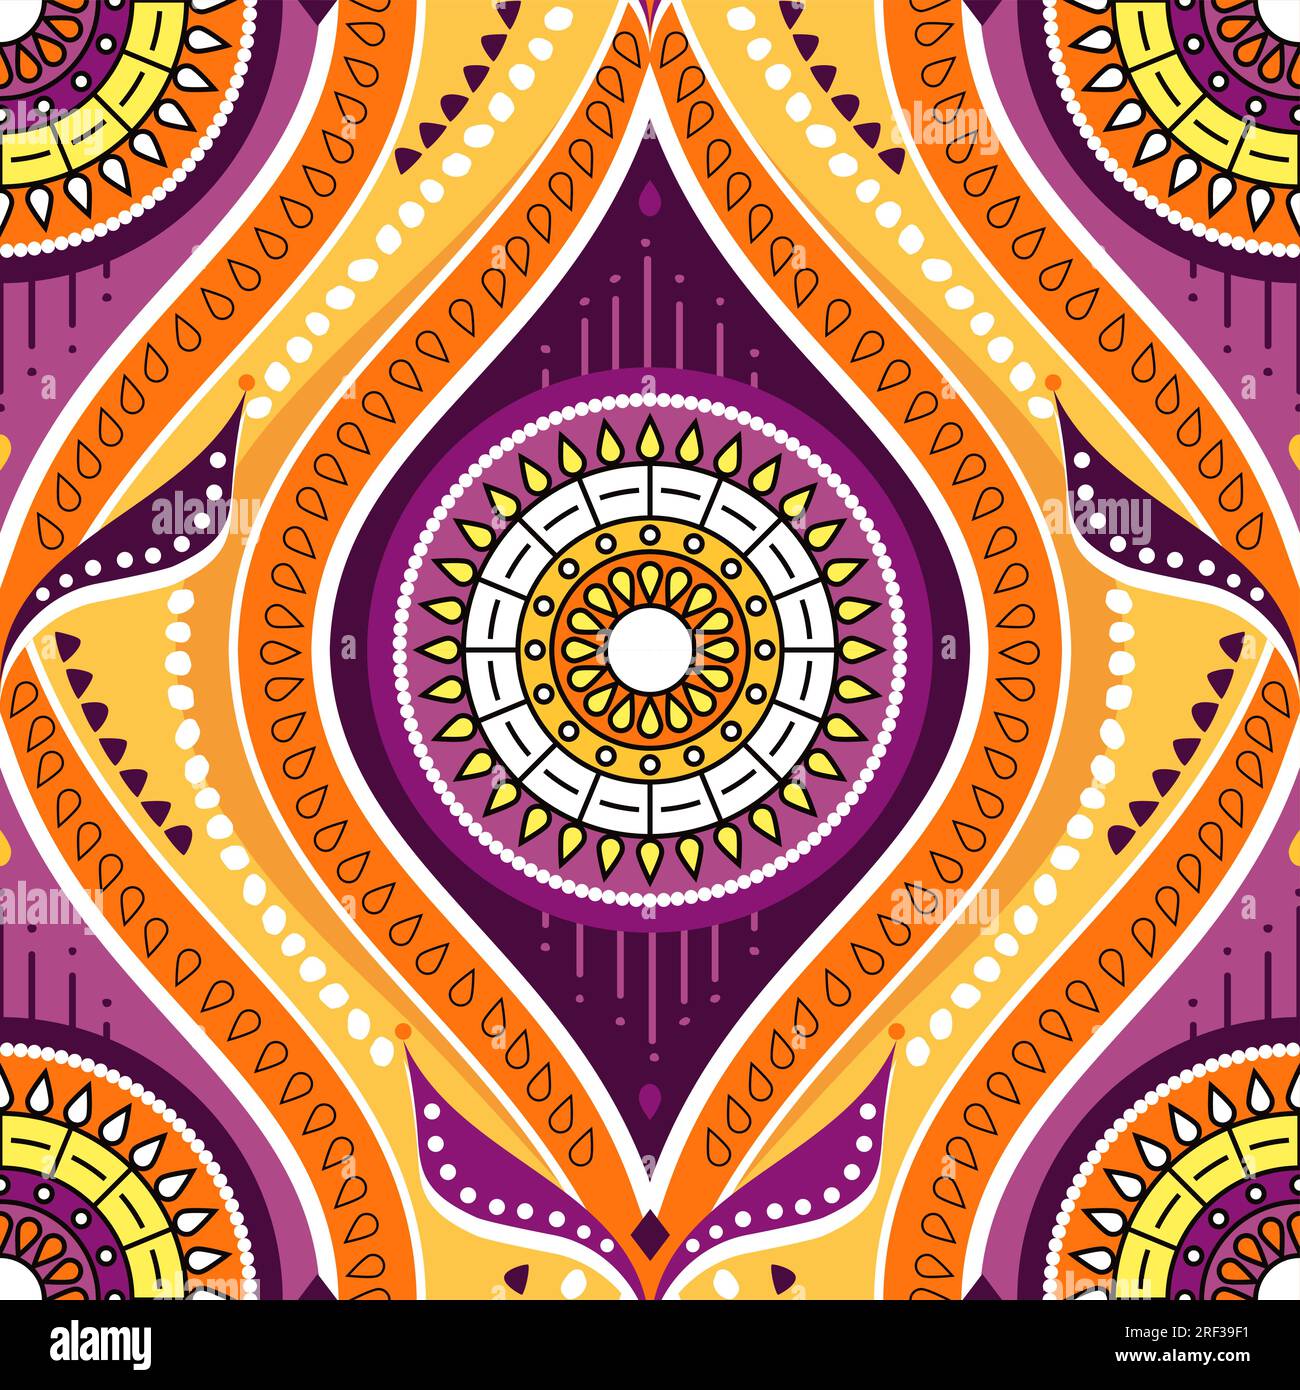 African wax or Ankara vector seamless pattern, Batic textile design with floral mandalas - traditional ornament from Kenya, West and Central Africa Stock Vector